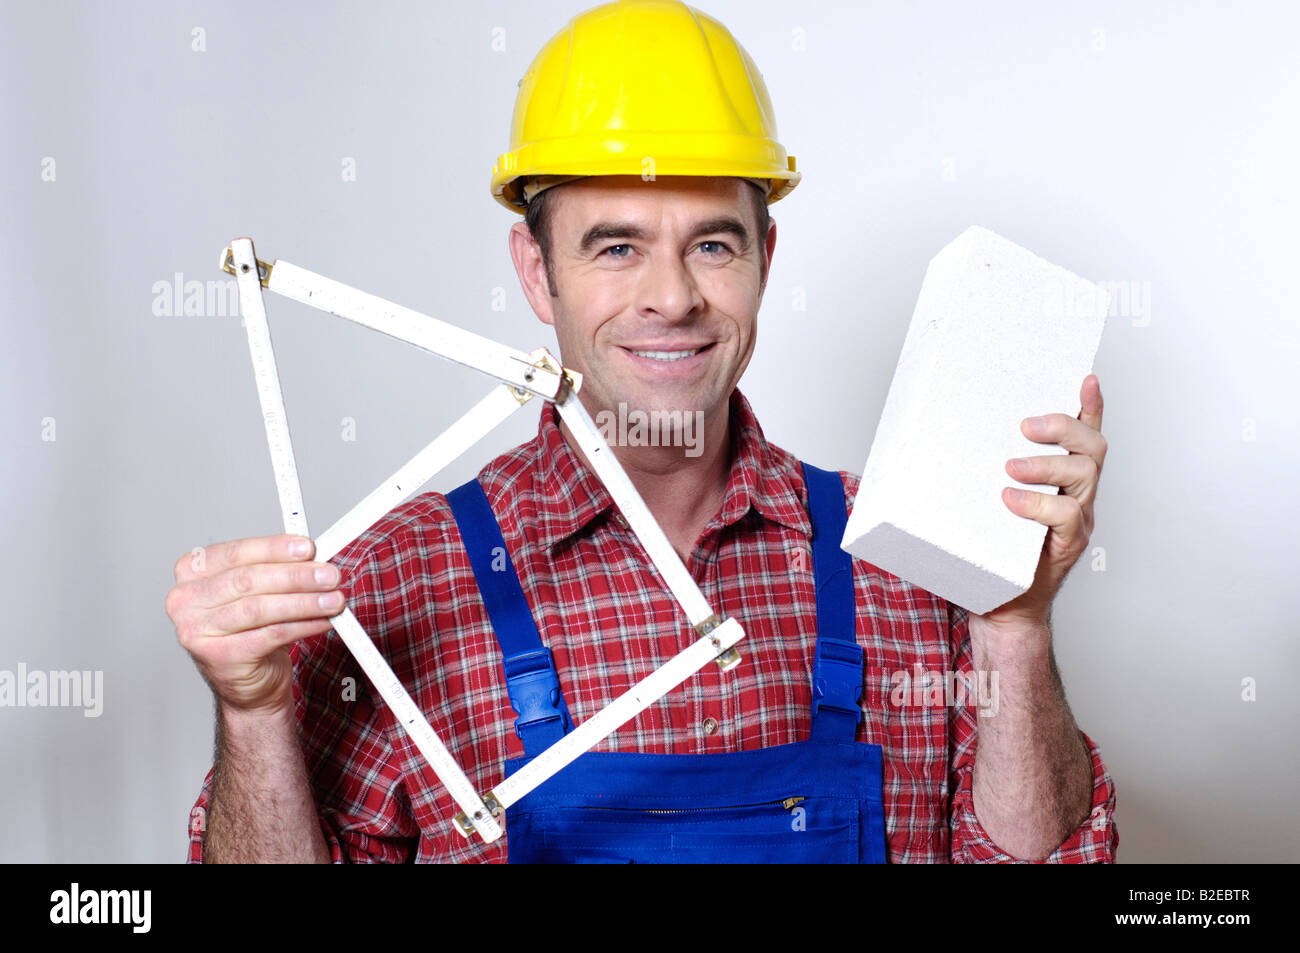 Portrait of man holding folding ruler and smiling Stock Photo